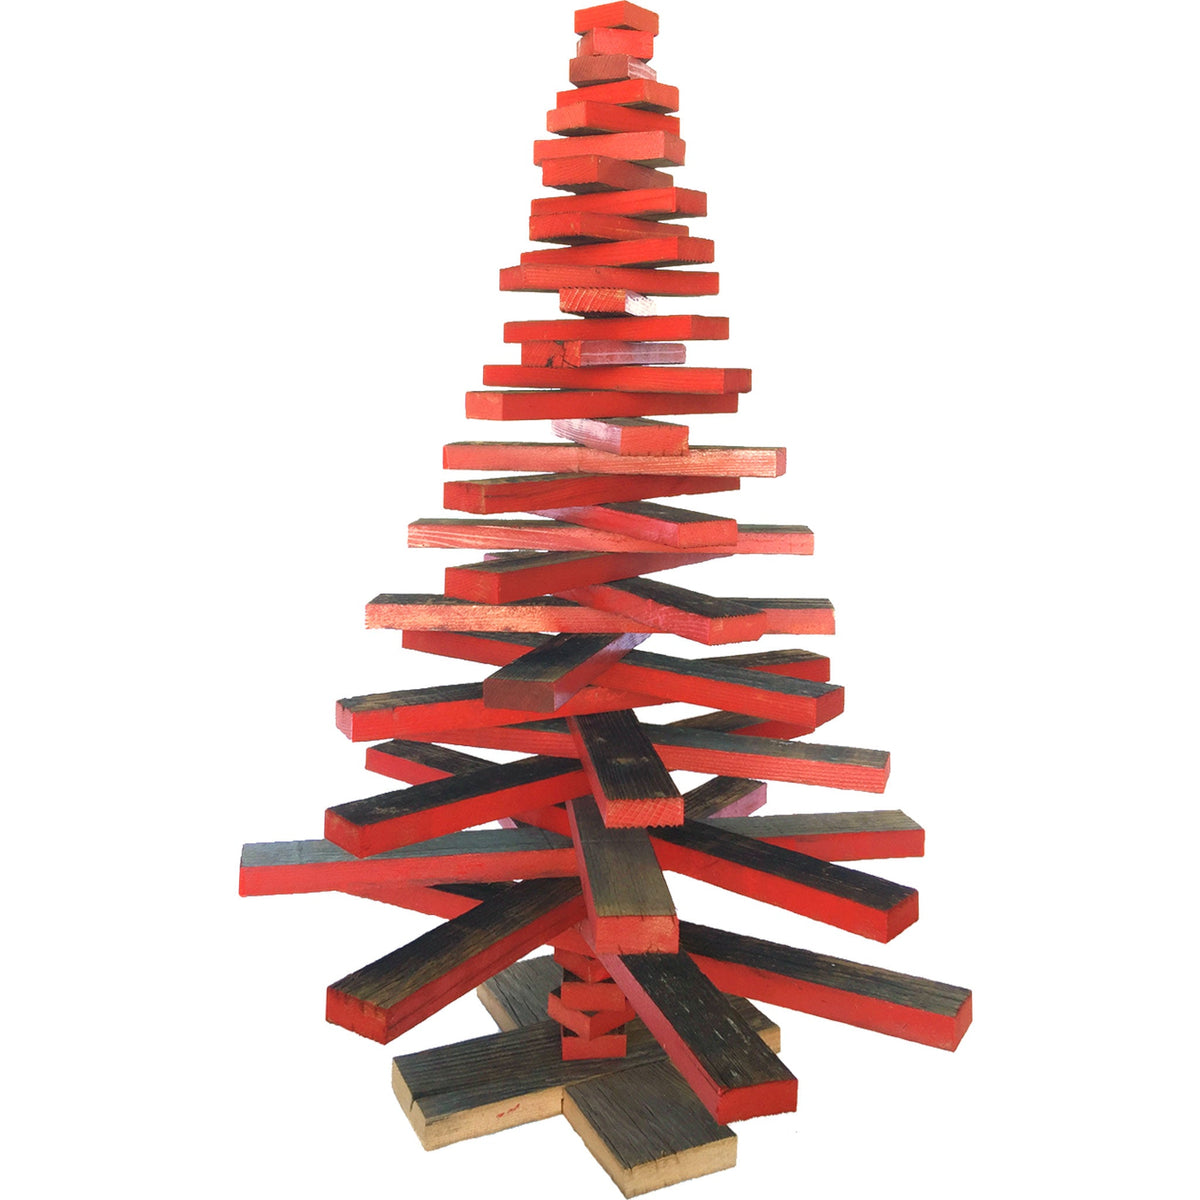 Shape the Tree How You Like!  Boards can be laid flat to be displayed against a wall like a 2-dimensional tree or spread around the tree in a 3-dimensional cone shape